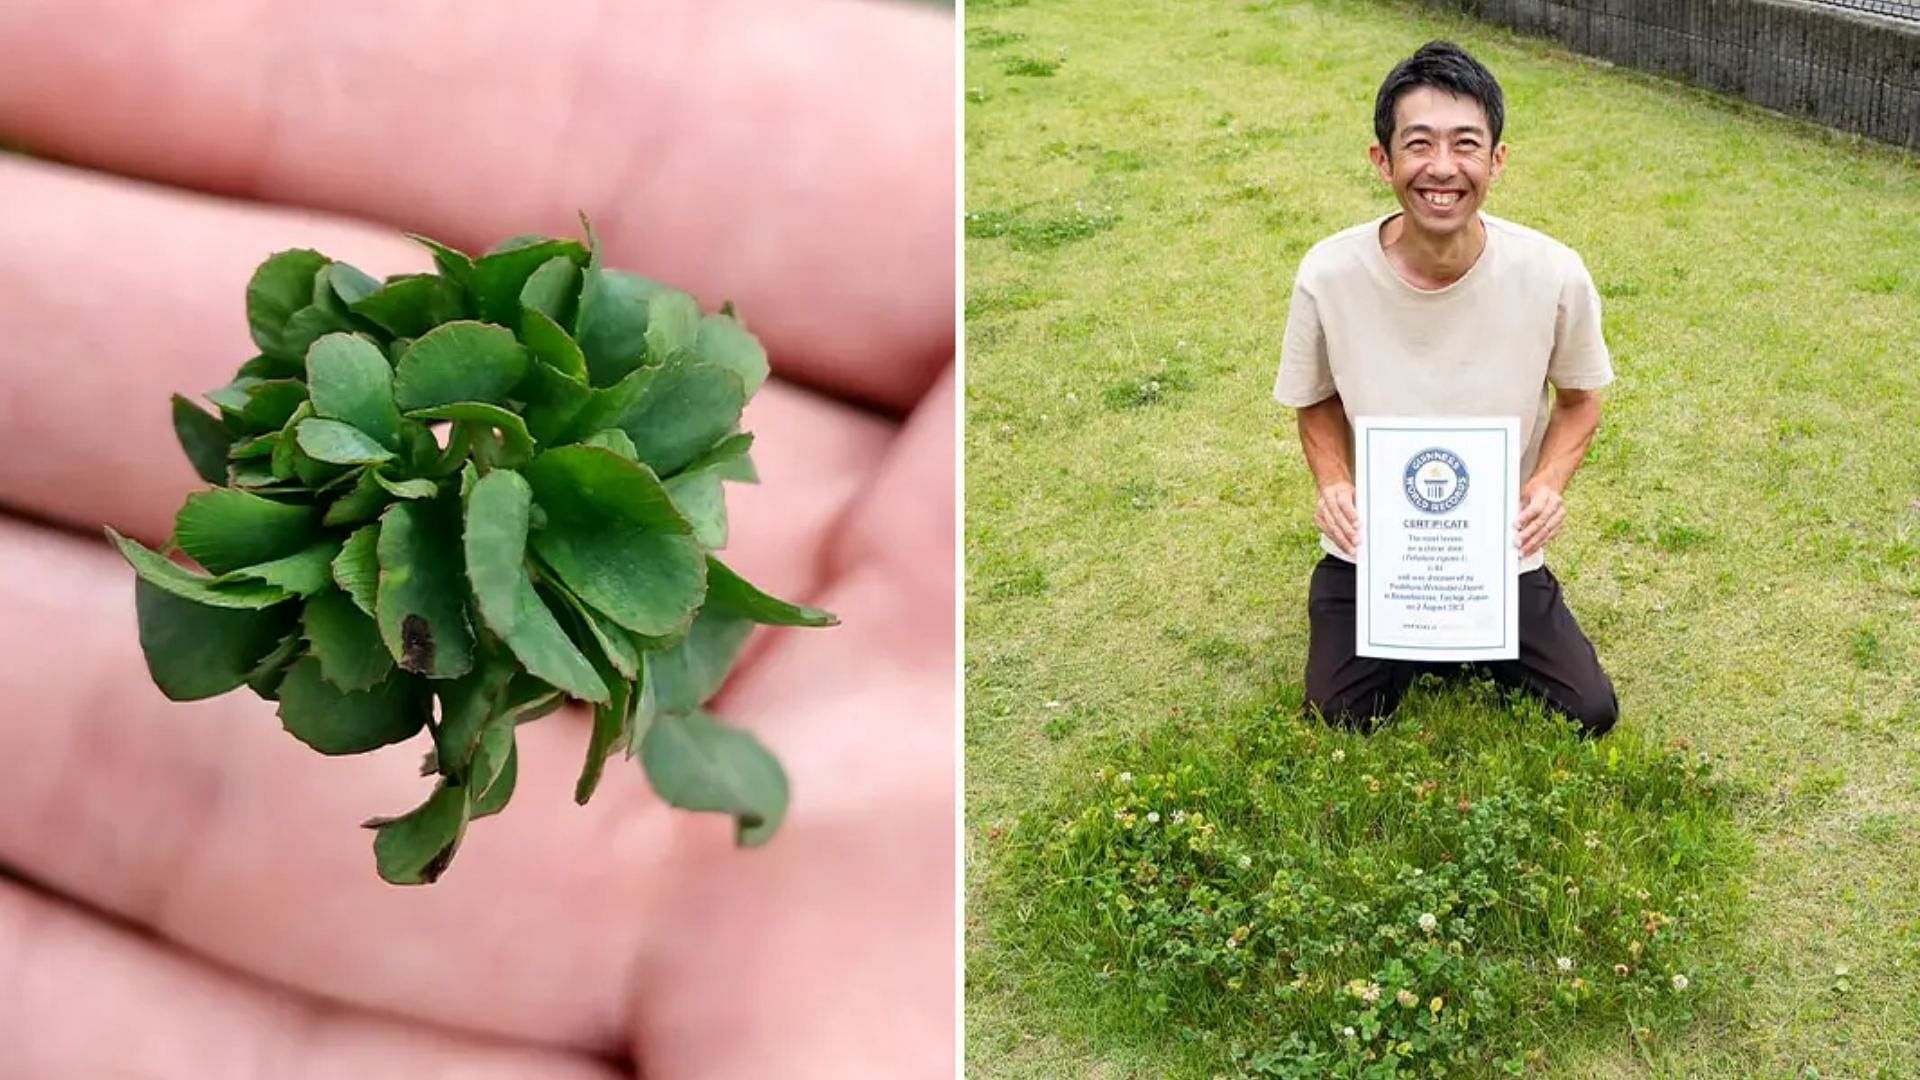 Record breaking 63 leaf clover grown by Japanese man setting a new guinness world record